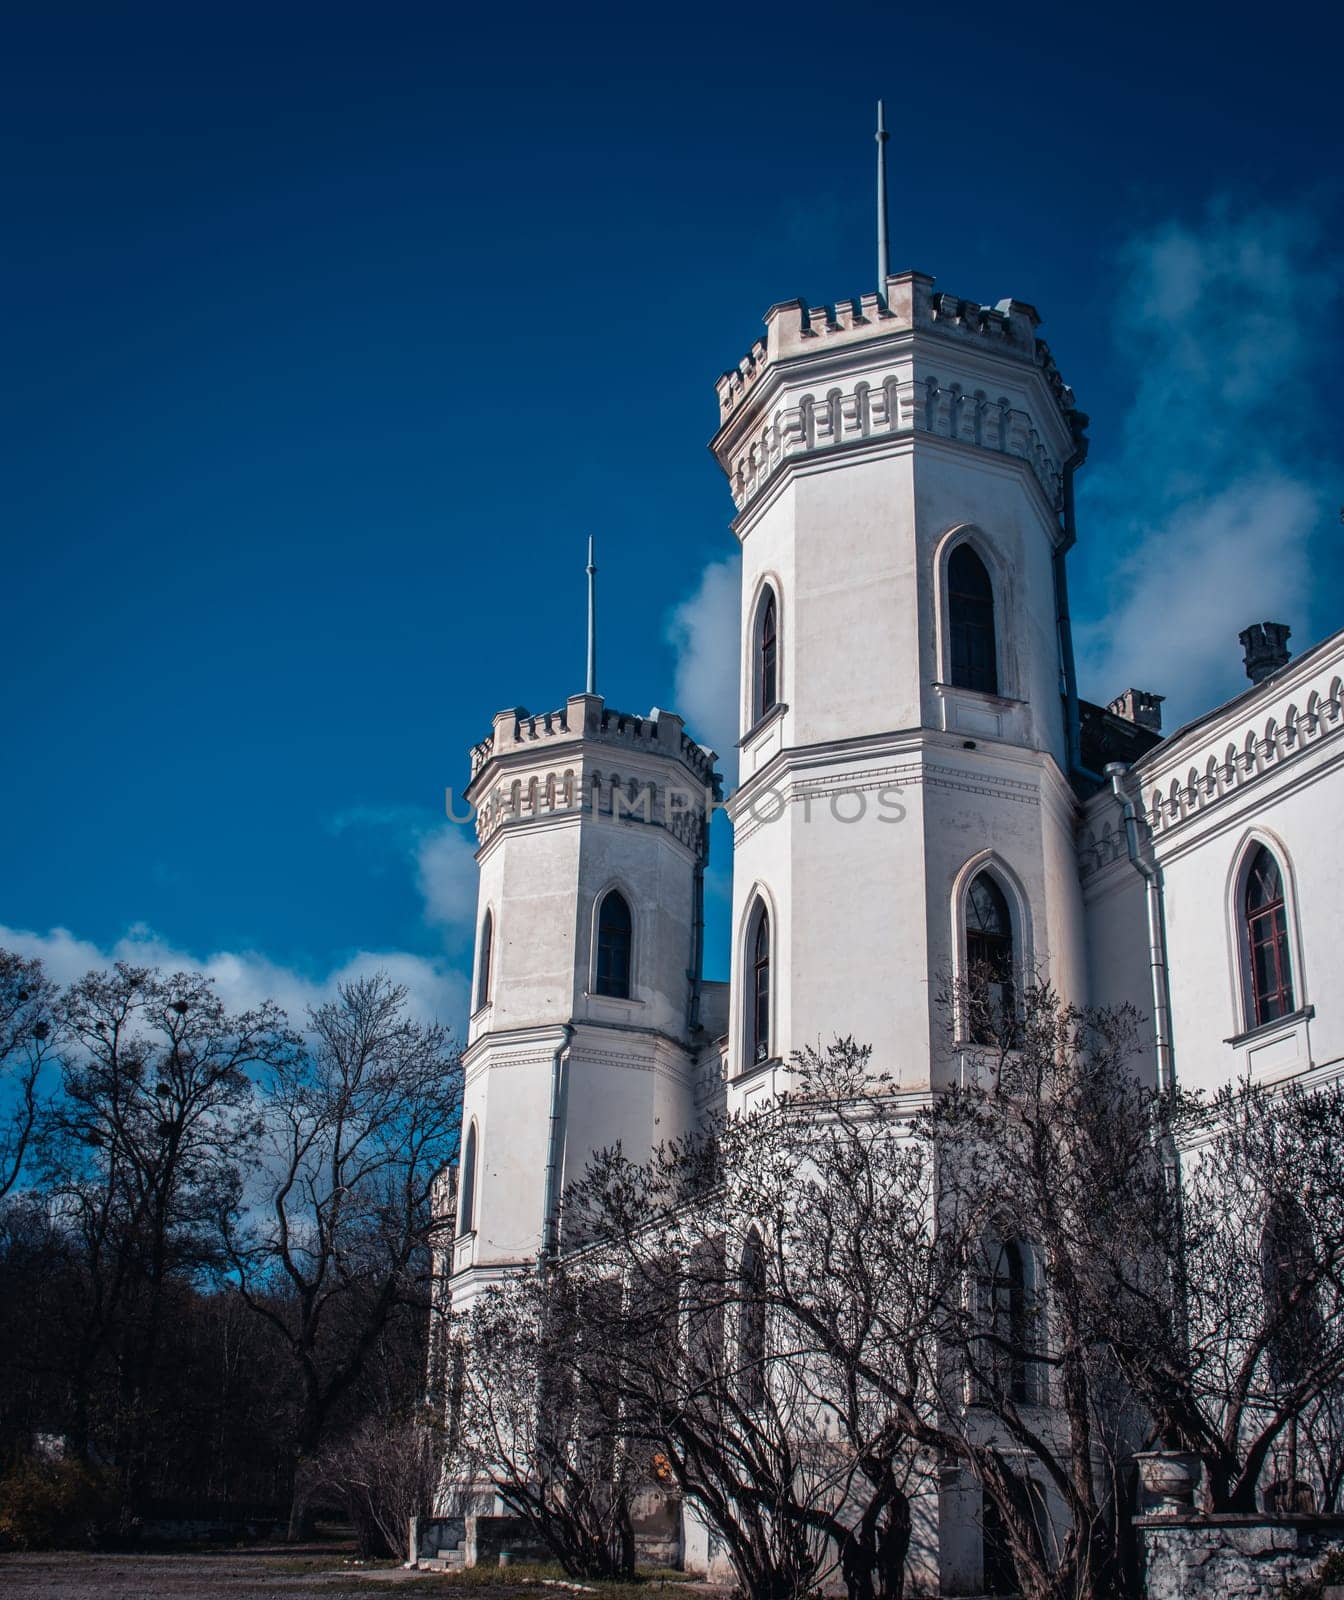 The tower of the old palace in neo-gothic style. Sugar Palace in Kharkov region, Ukraine. by _Nataly_Nati_